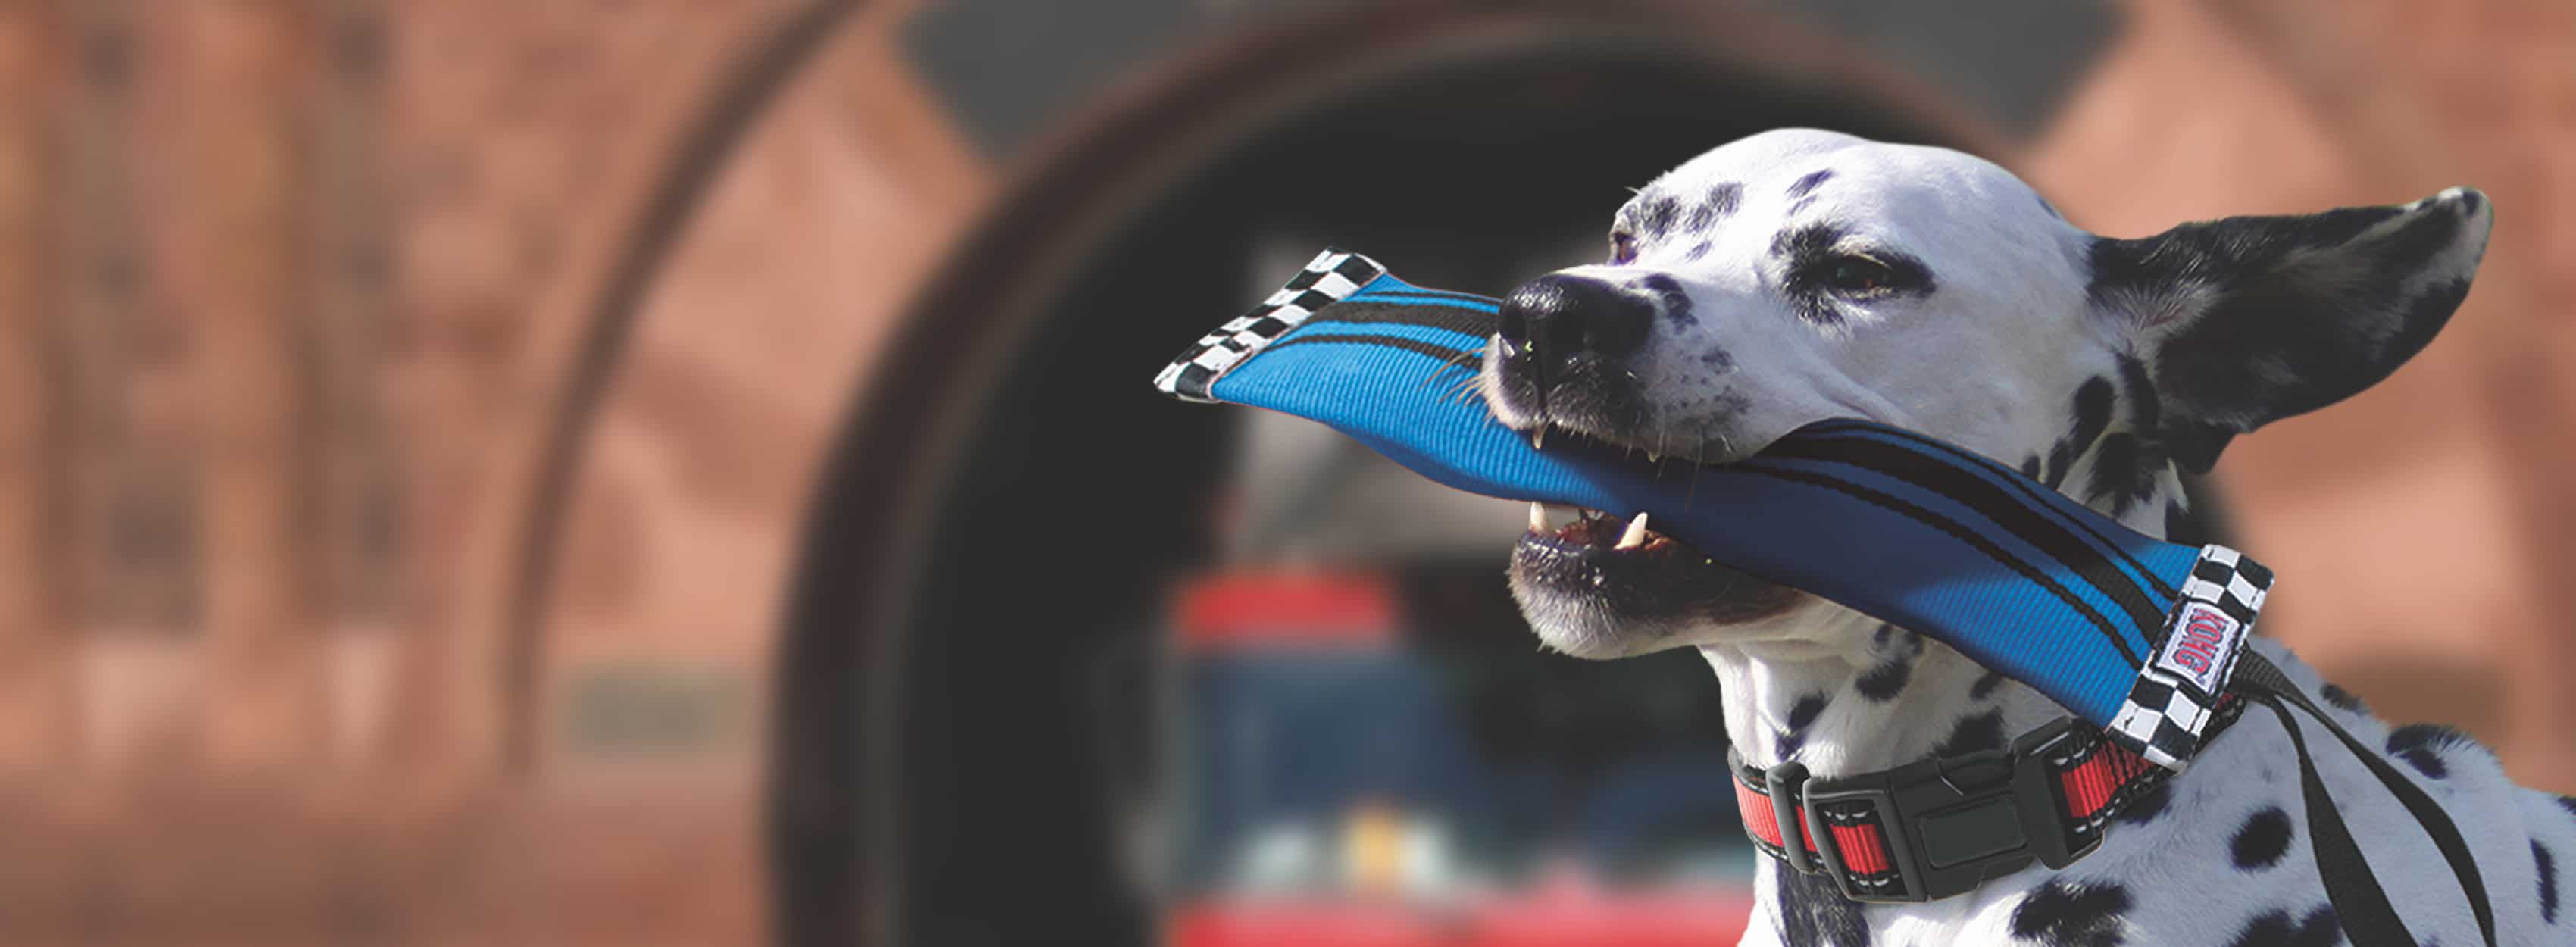 Dalmation with Blue KONG toy in front of a firehouse.